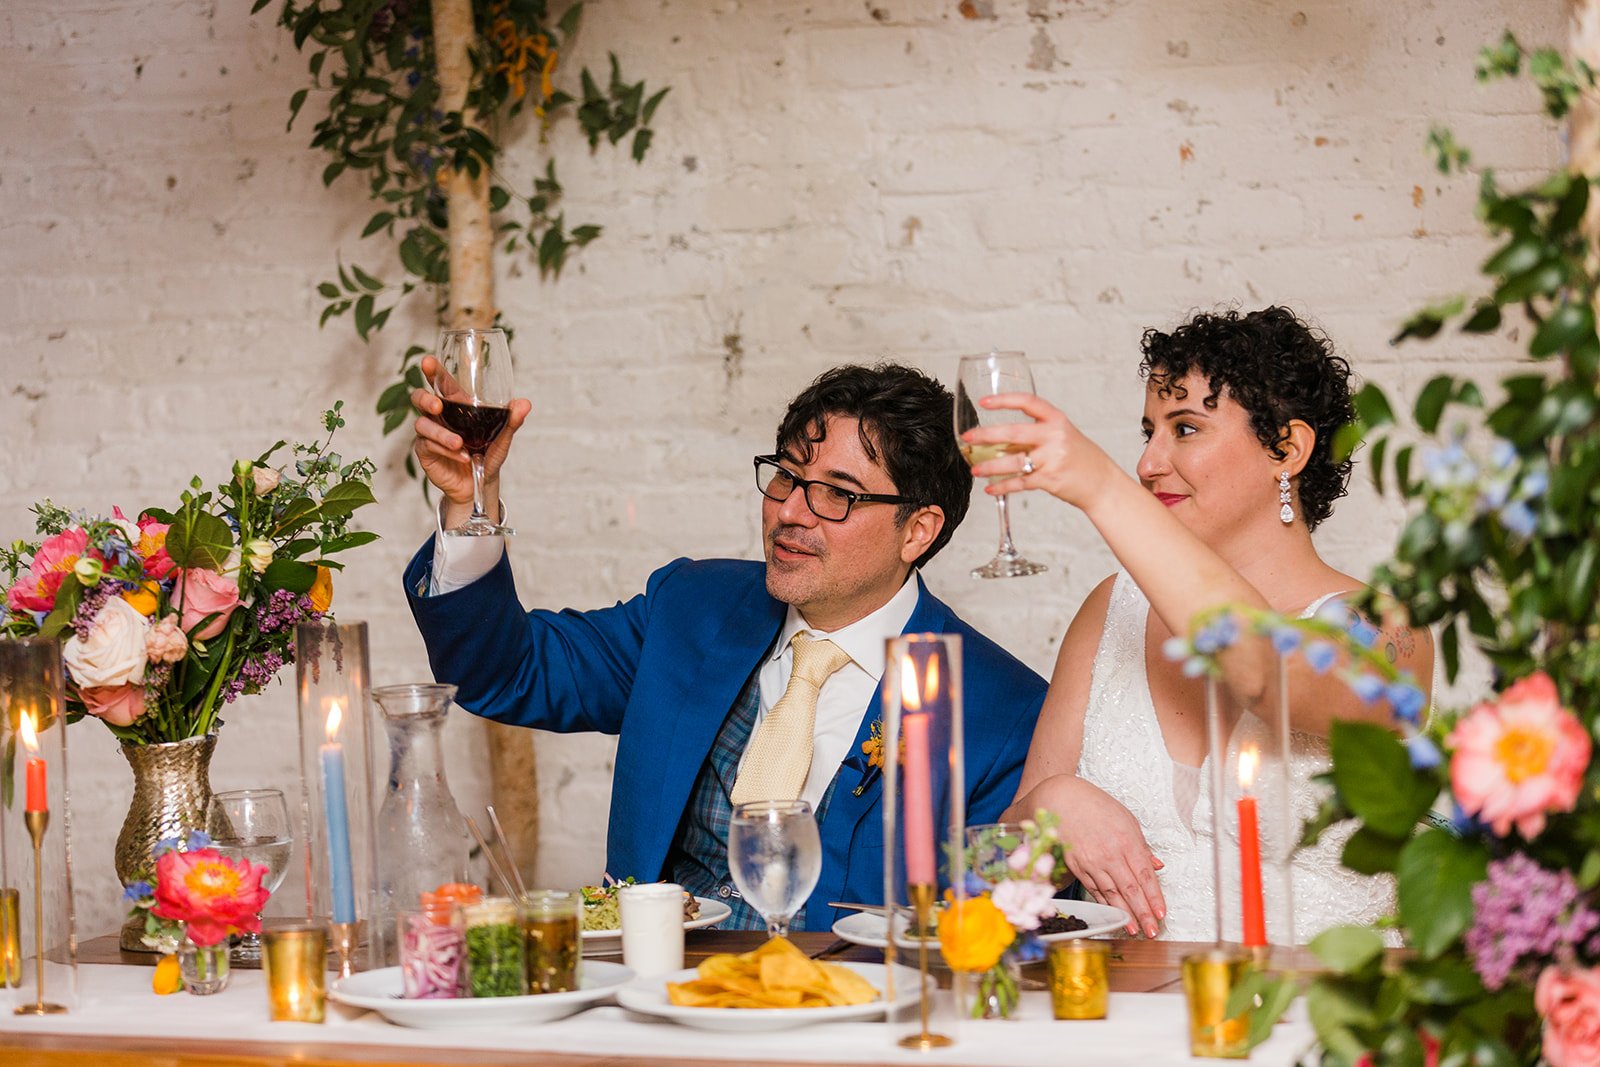  Documentary candid photo of bride and groom cheersing to a toast during the reception at nontraditional Jewish and Venezuelan wedding at The Joinery Chicago an Industrial loft wedding venue In Logan Square.  